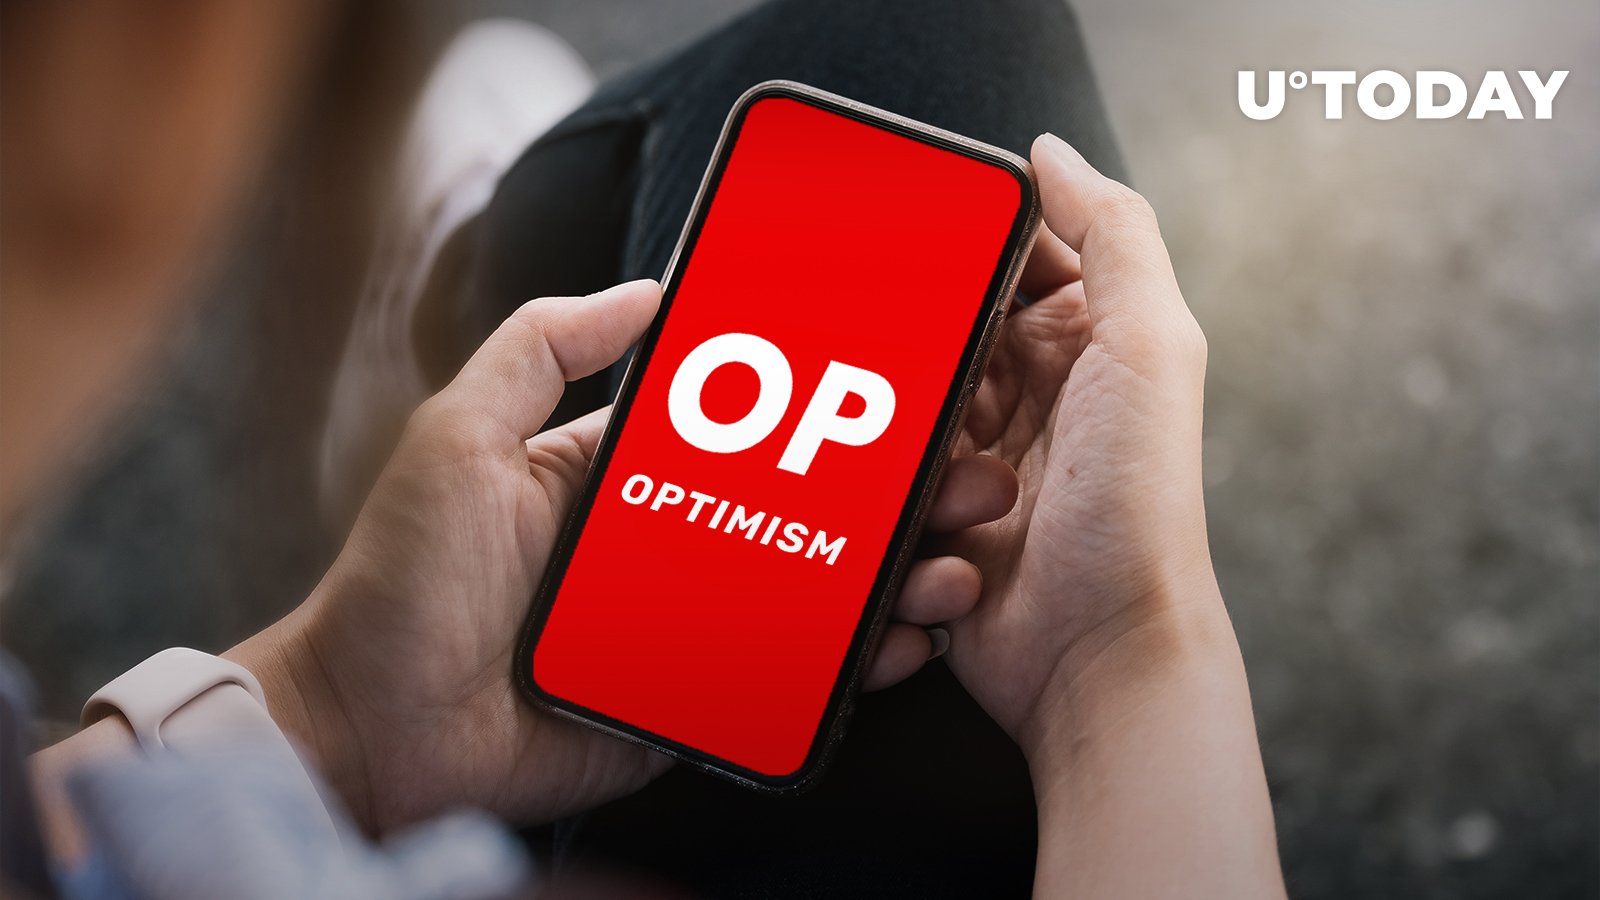 Optimism (OP) Sees 300% Spike in Daily Transactions, Here’s Price Impact